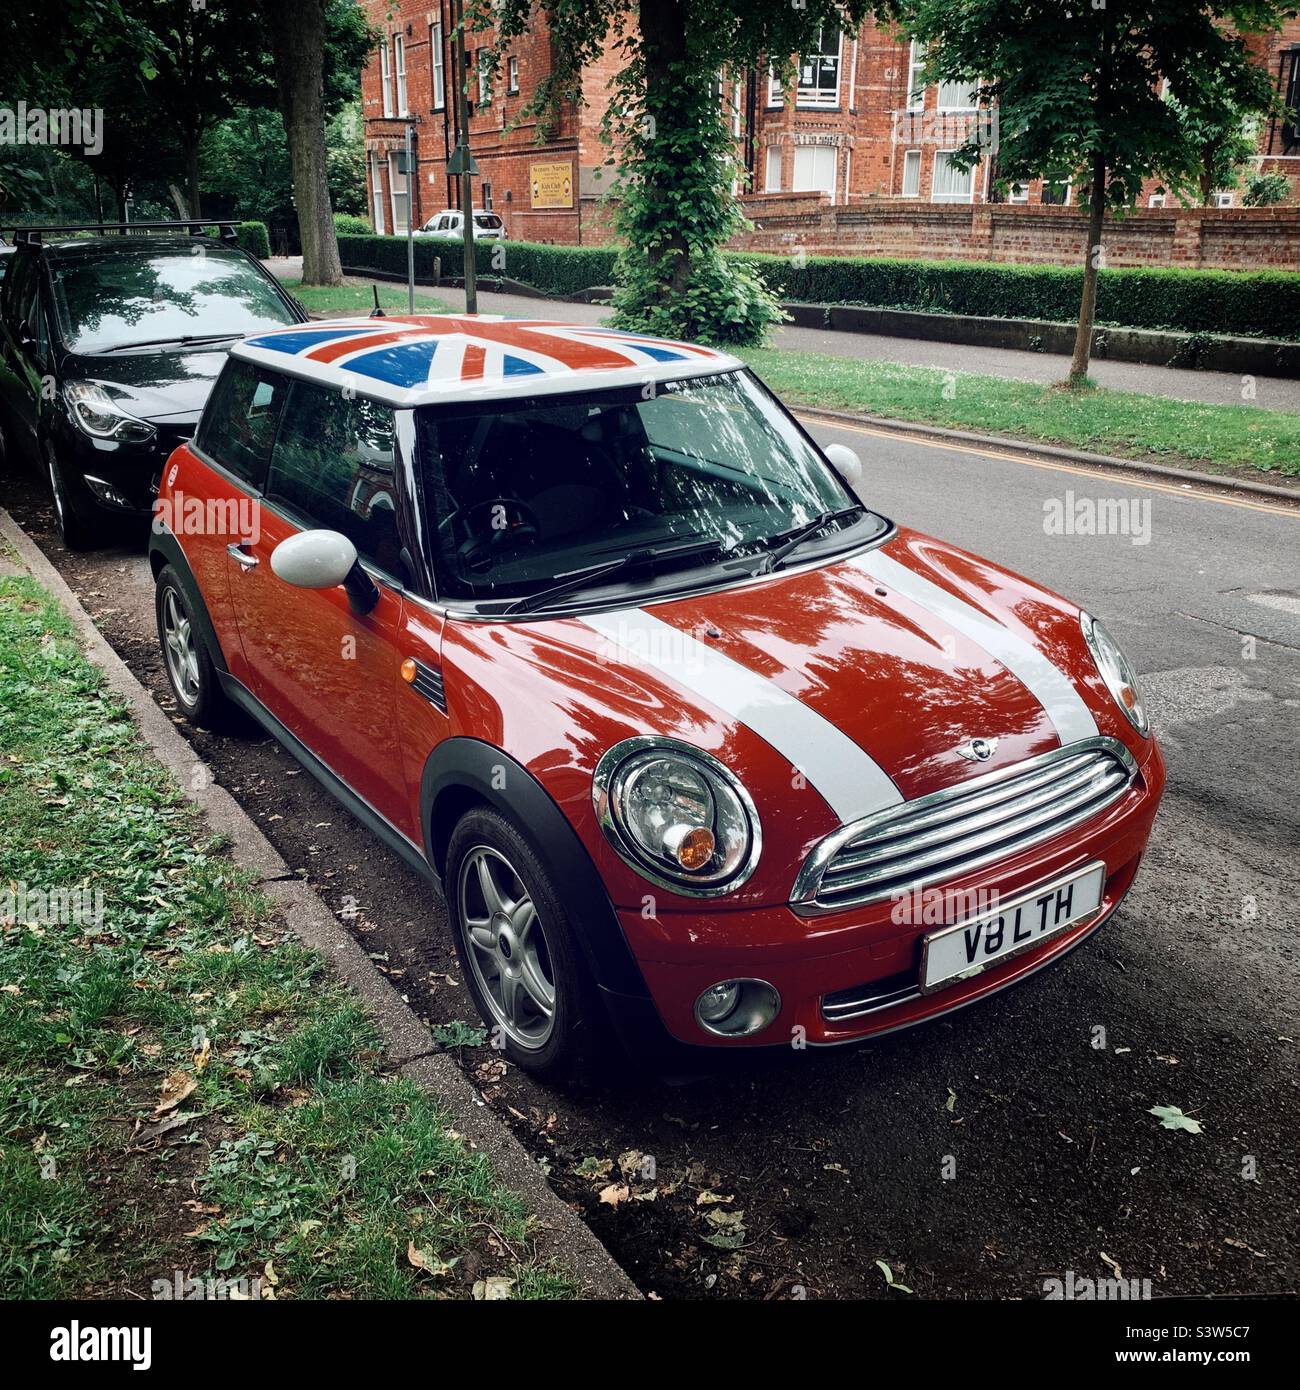 https://c8.alamy.com/comp/S3W5C7/a-shiny-red-mini-parked-on-a-leafy-suburban-street-with-a-union-jack-flag-roof-S3W5C7.jpg